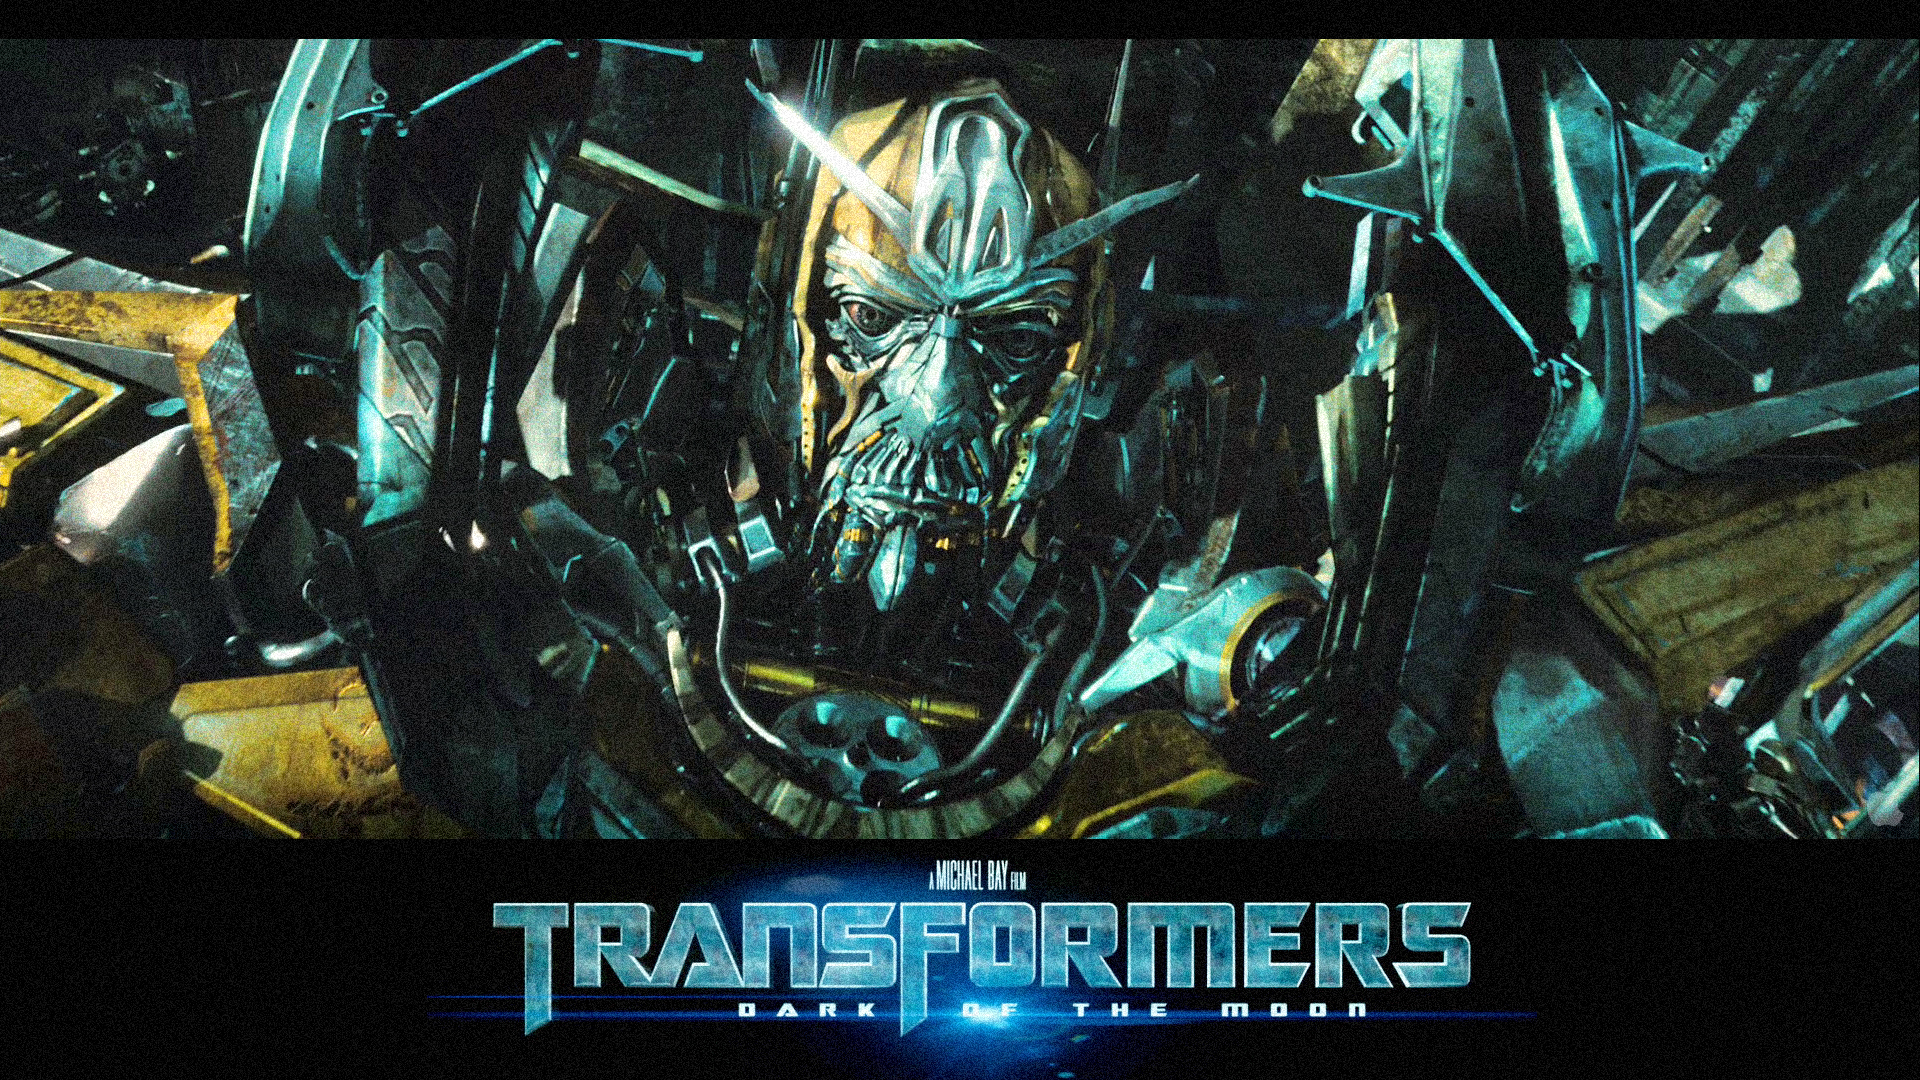 http://browntails.files.wordpress.com/2011/04/transformers-dark-of-the-moon-wallpapers-2.jpg